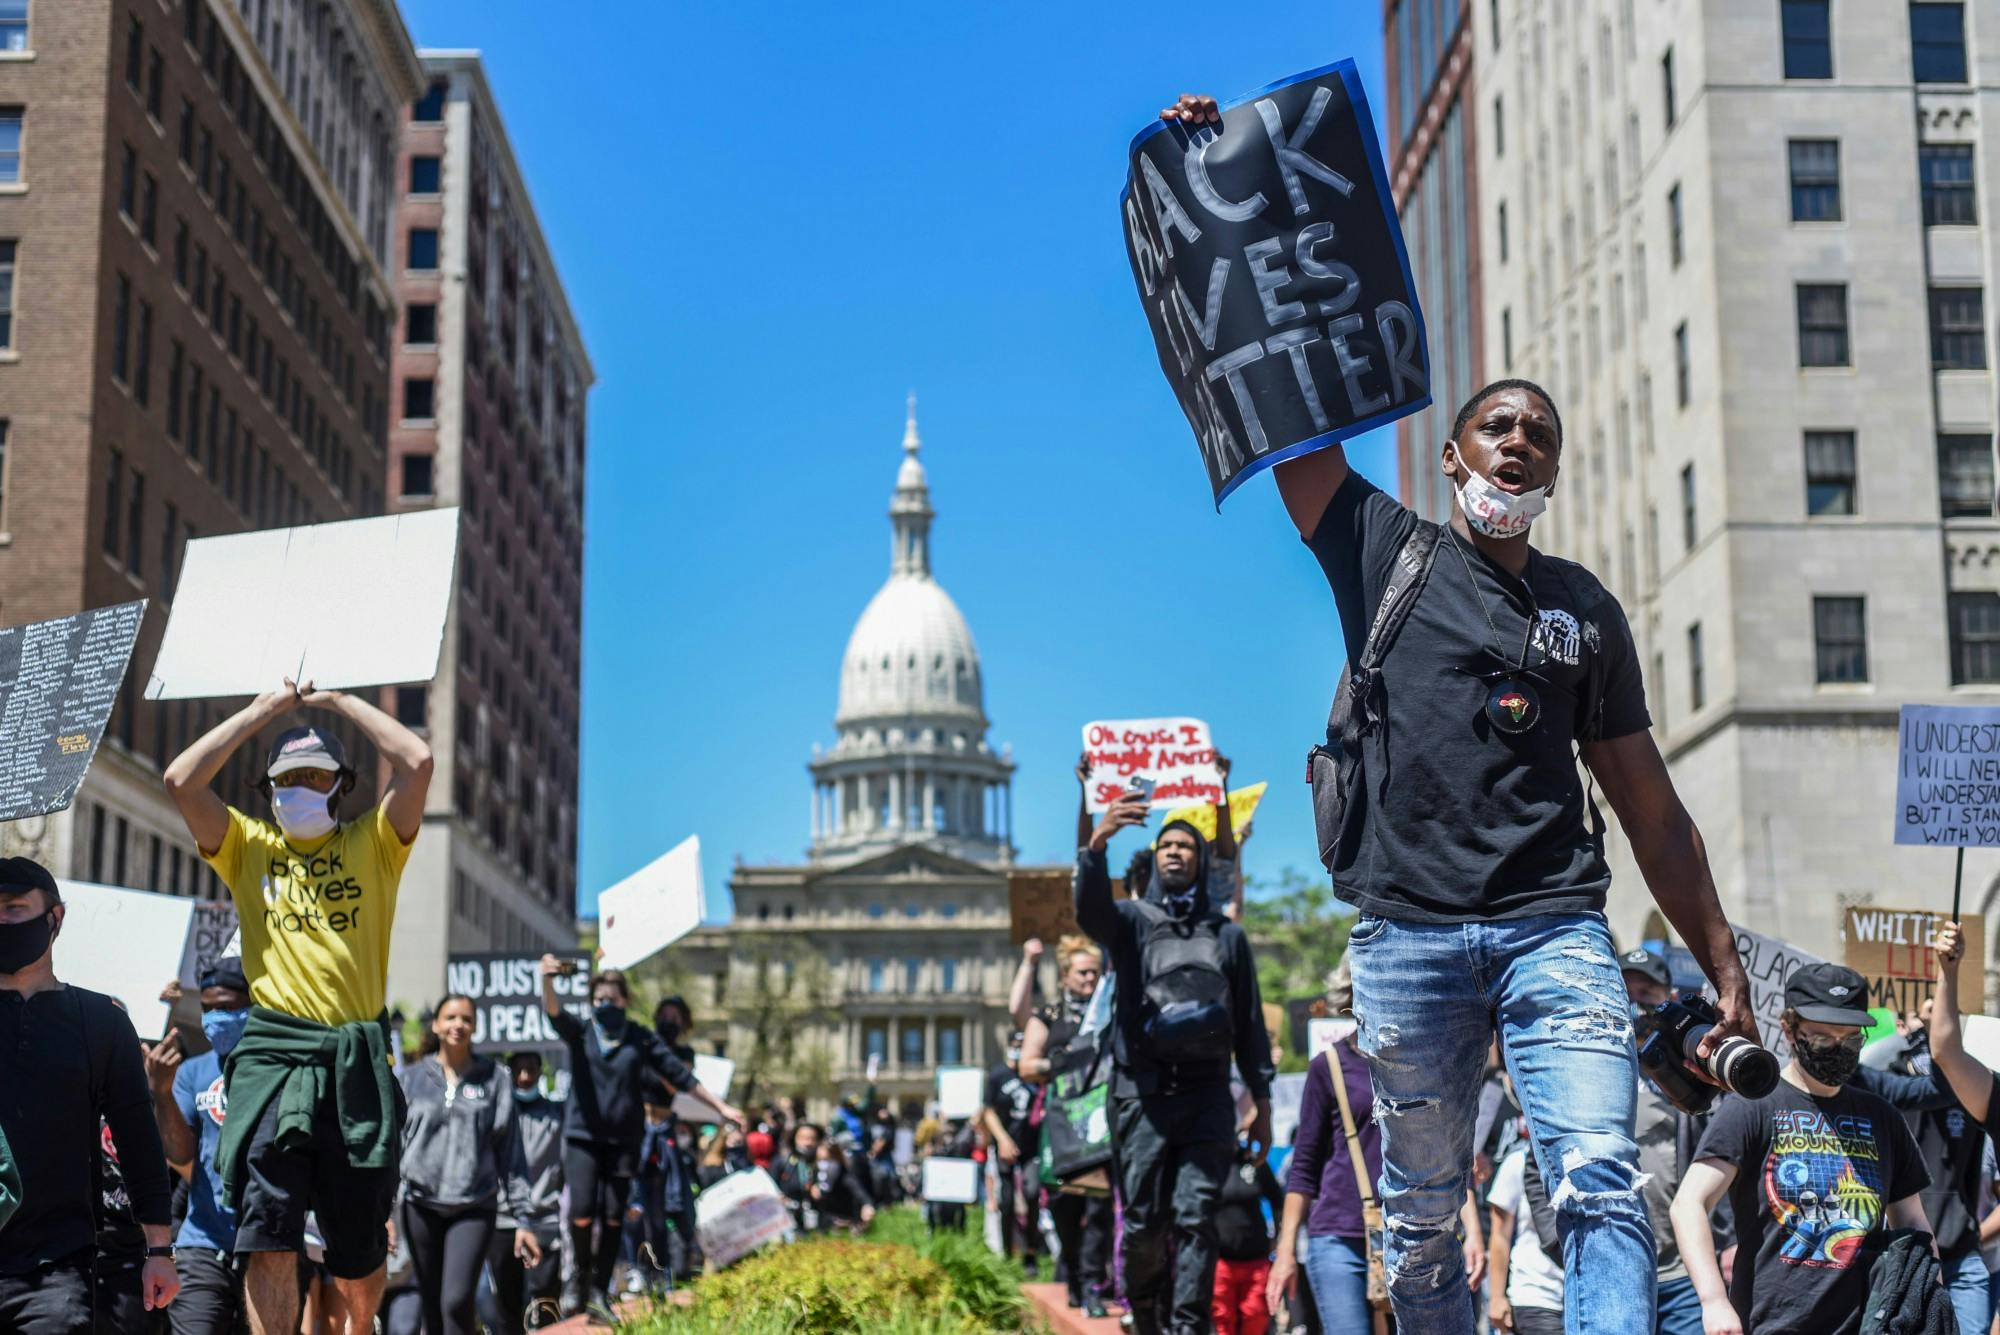 People march at the protest in Lansing against police brutality May 31, 2020.